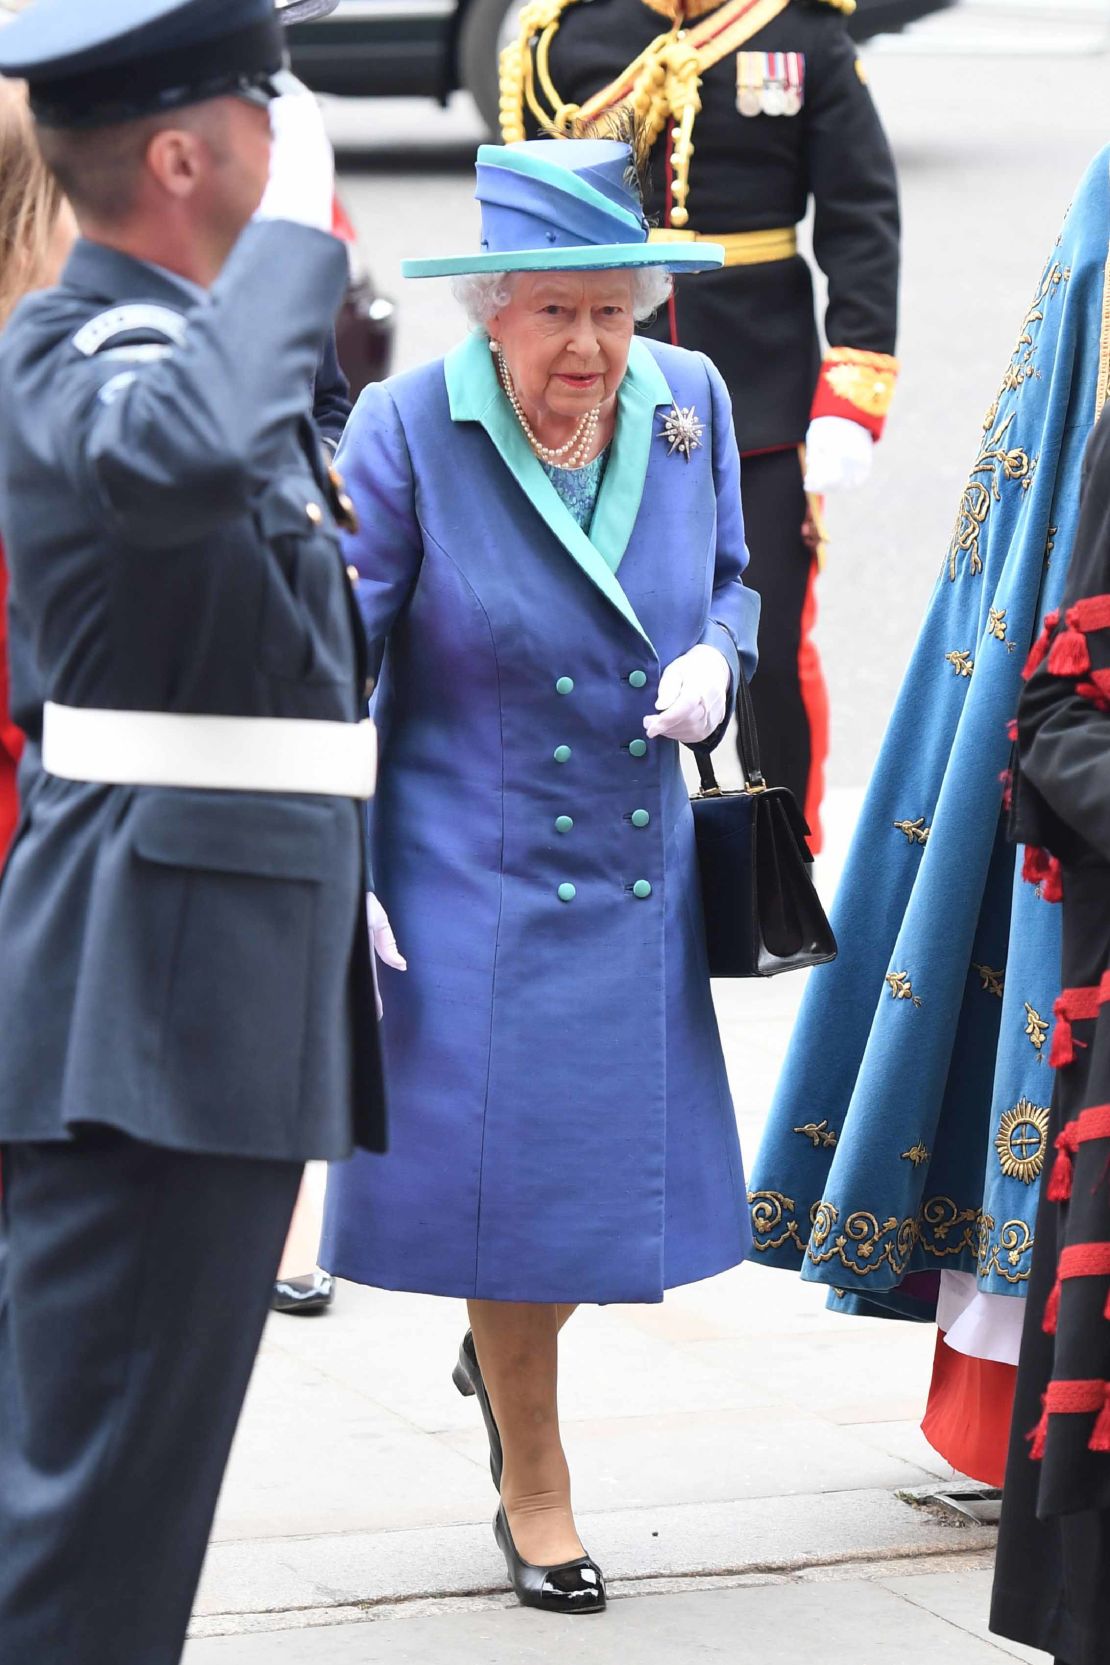 Queen Elizabeth arrives for the service at Westminster Abbey on Tuesday.